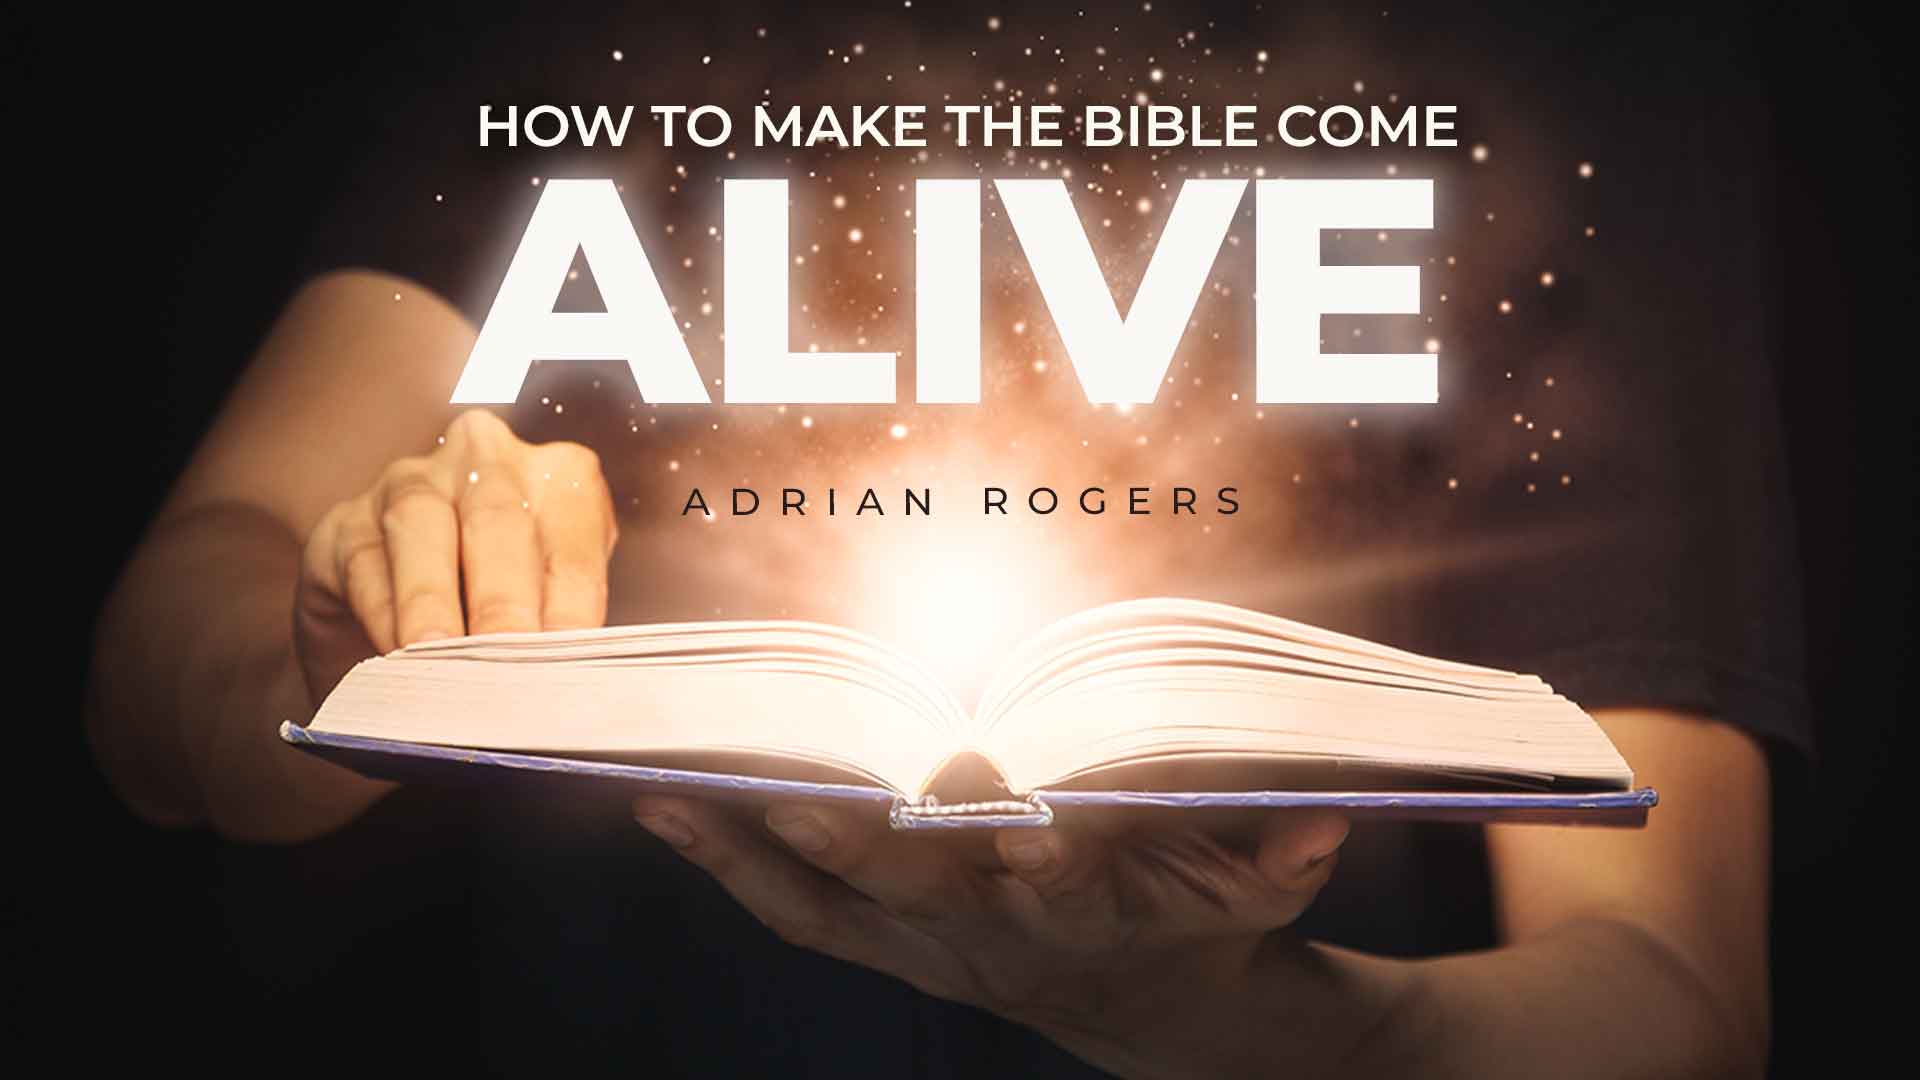 How Make the Bible Come Alive 1920x1080